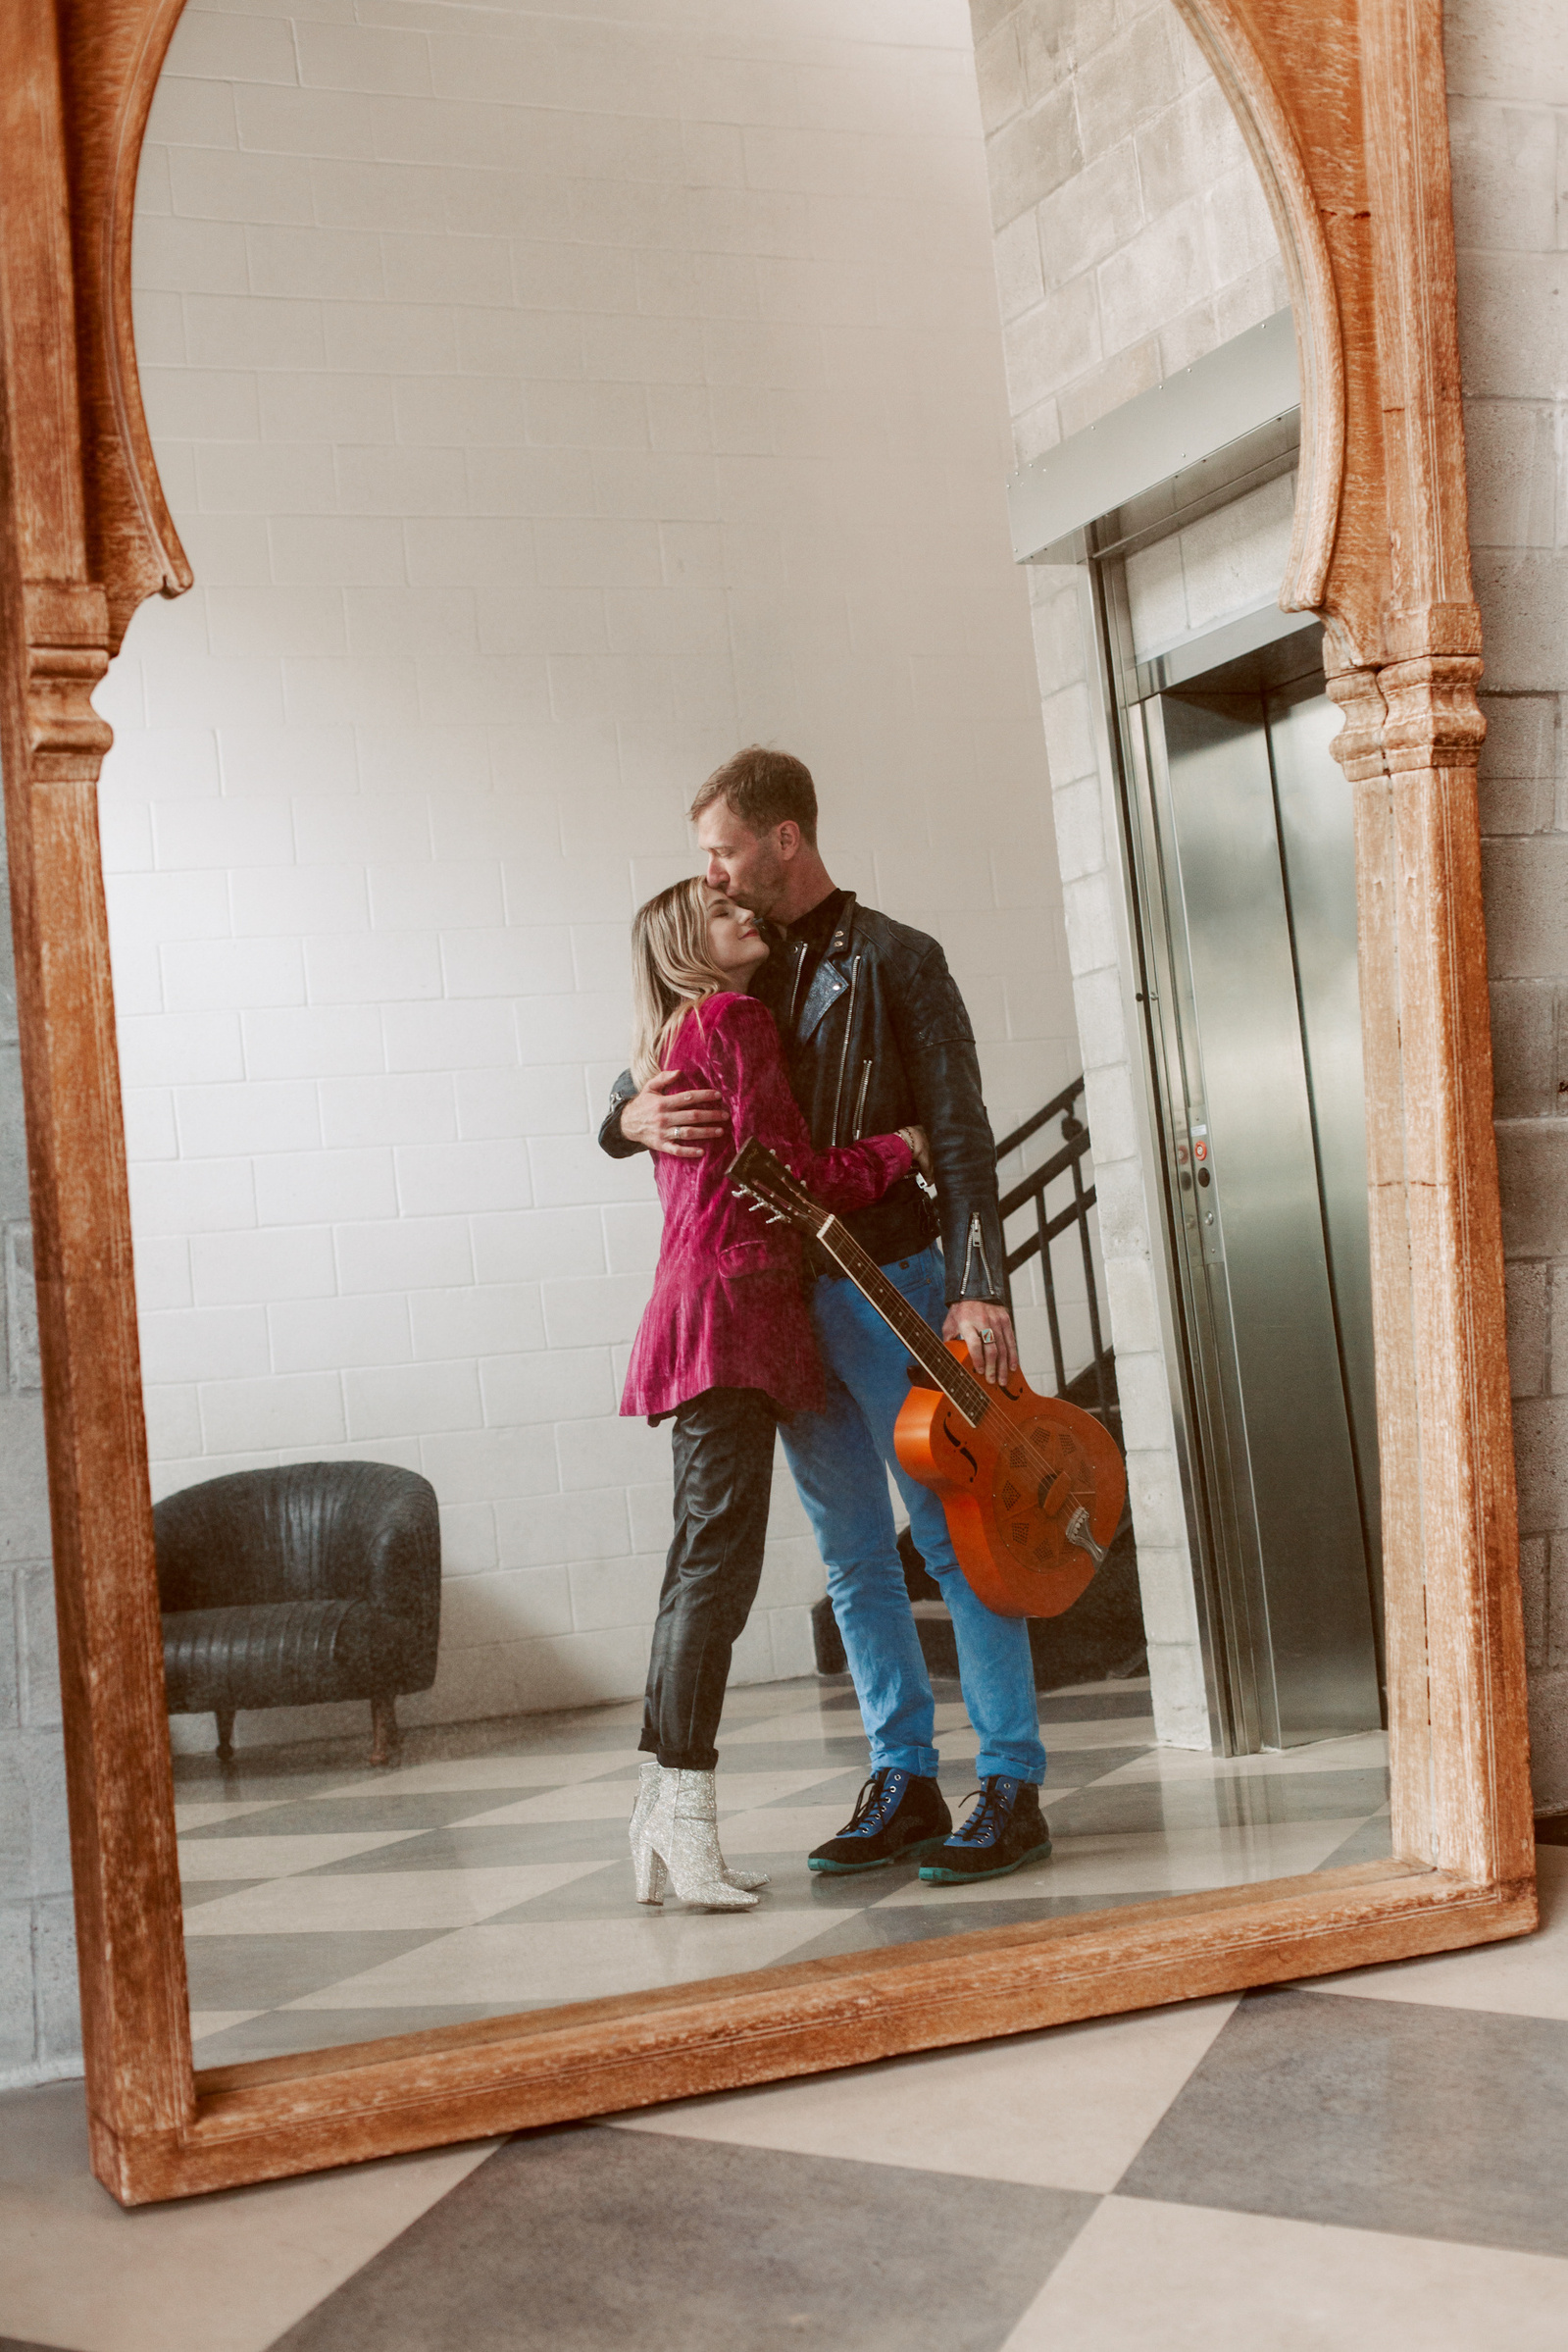 Cinematic moment of a couple with a guitar reflected in a mirror